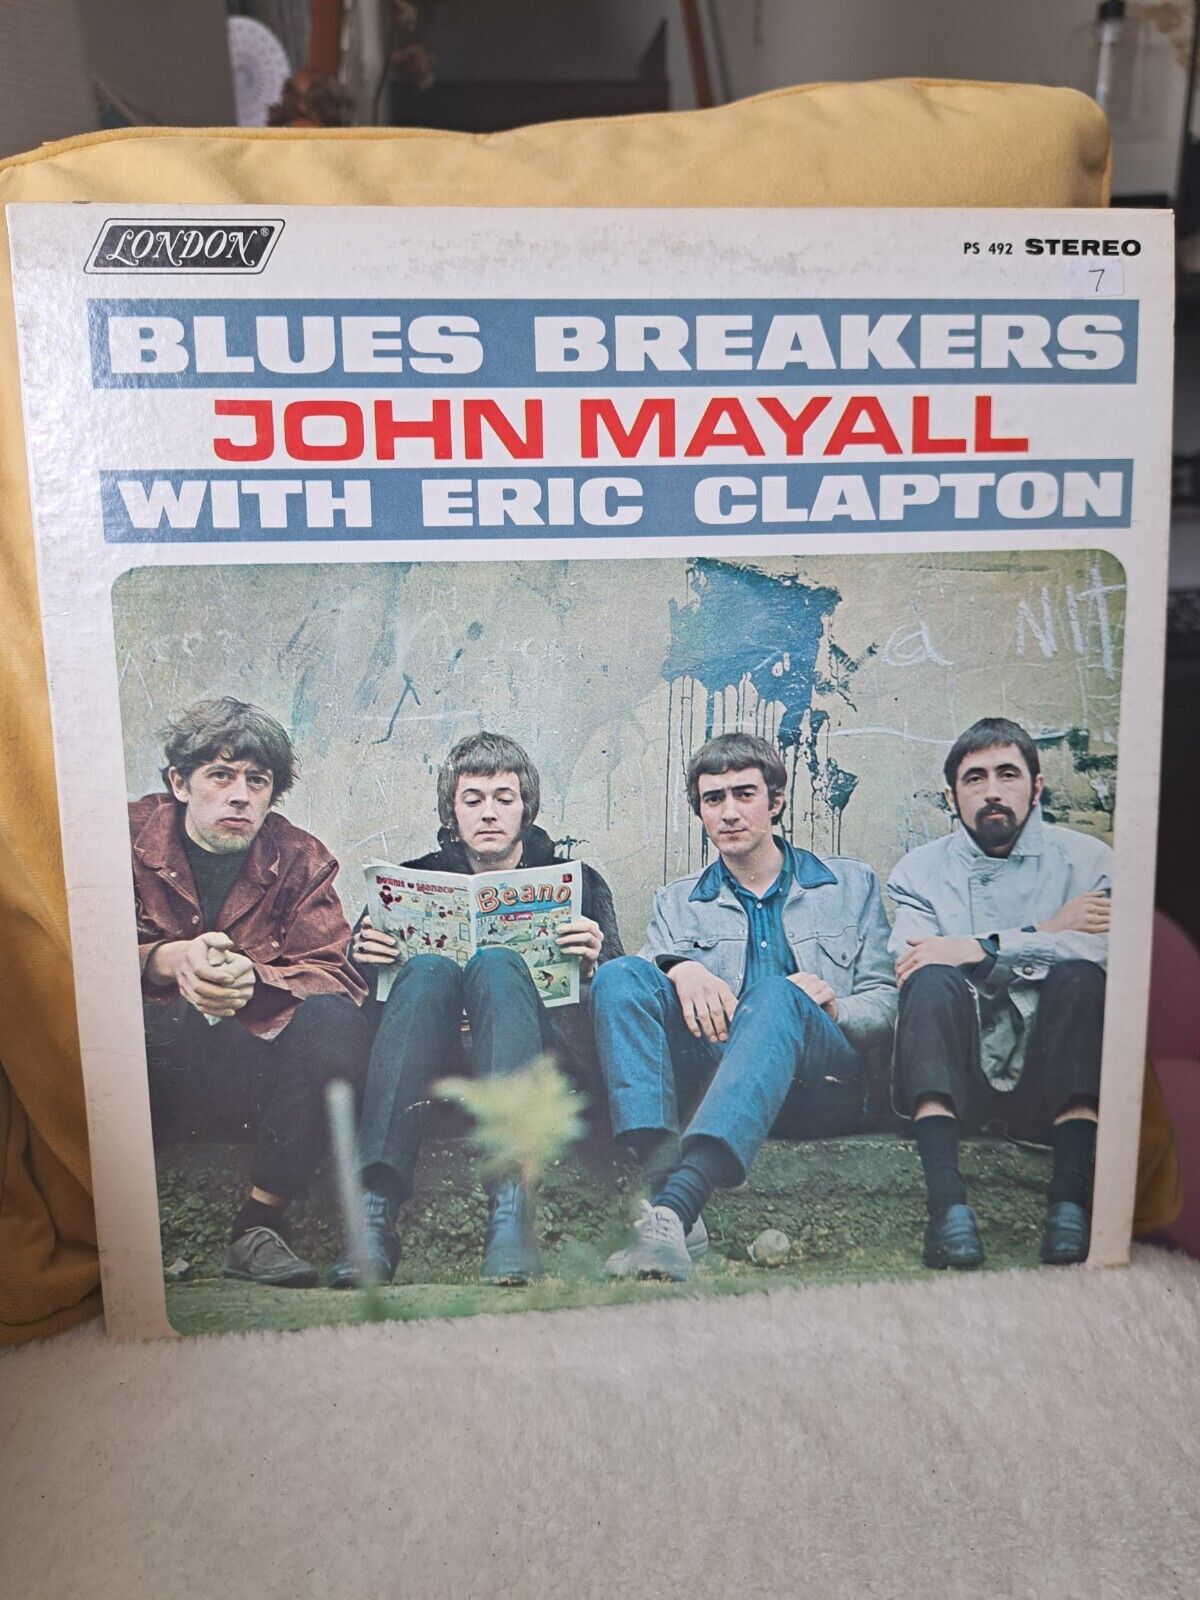 Blues Breakers John Mayall With Eric Clapton LP Canada London Stereo PS 492